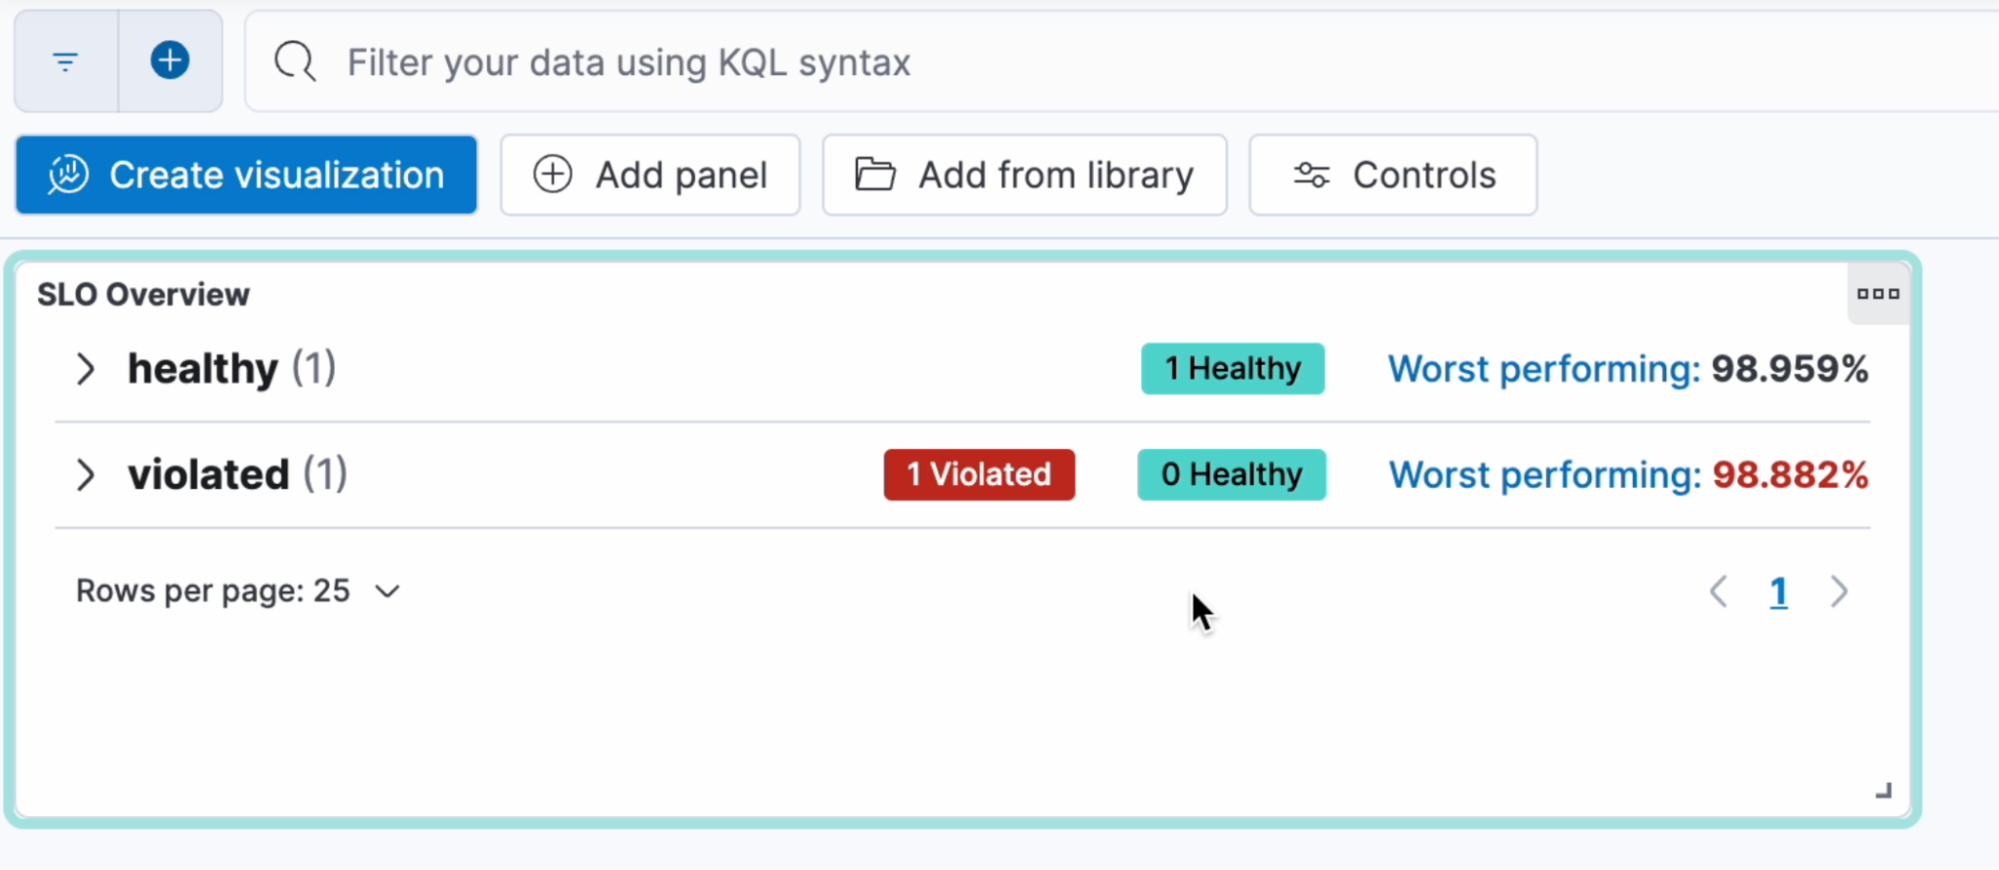 What’s new in 8.14: Screenshot of a visualization that identifies healthy and violated SLOs